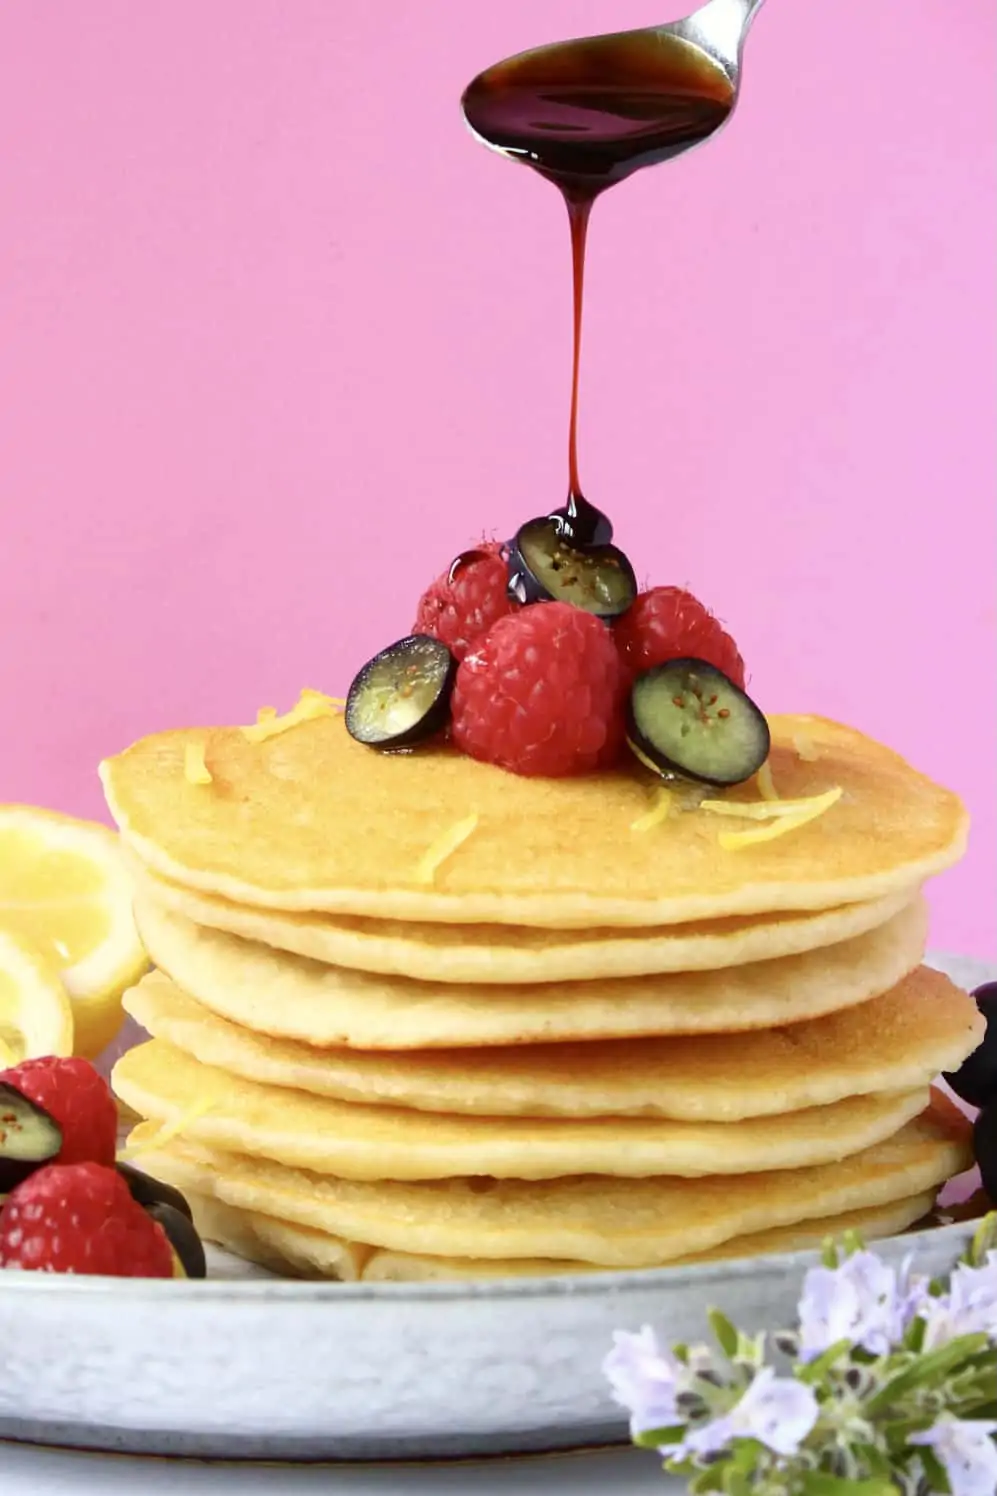 A stack of gluten-free vegan pancakes topped with fresh berries and syrup